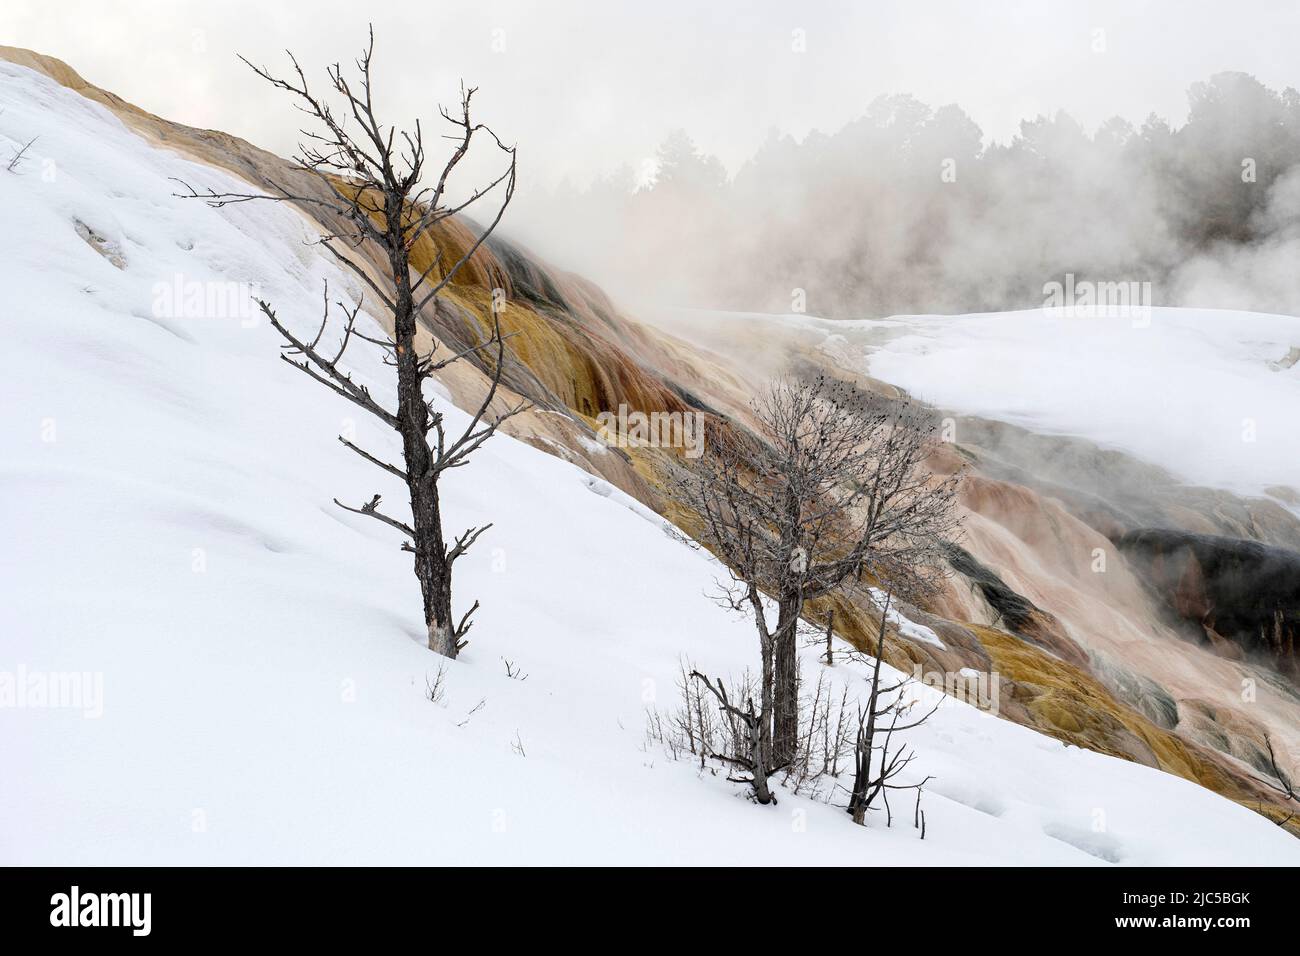 États-Unis, montagnes Rocheuses, Wyoming, Parc national de Yellowstone, Mammoth Hot Springs, scène d'hiver *** Légende locale *** États-Unis, montagnes Rocheuses, Wyoming, Yello Banque D'Images